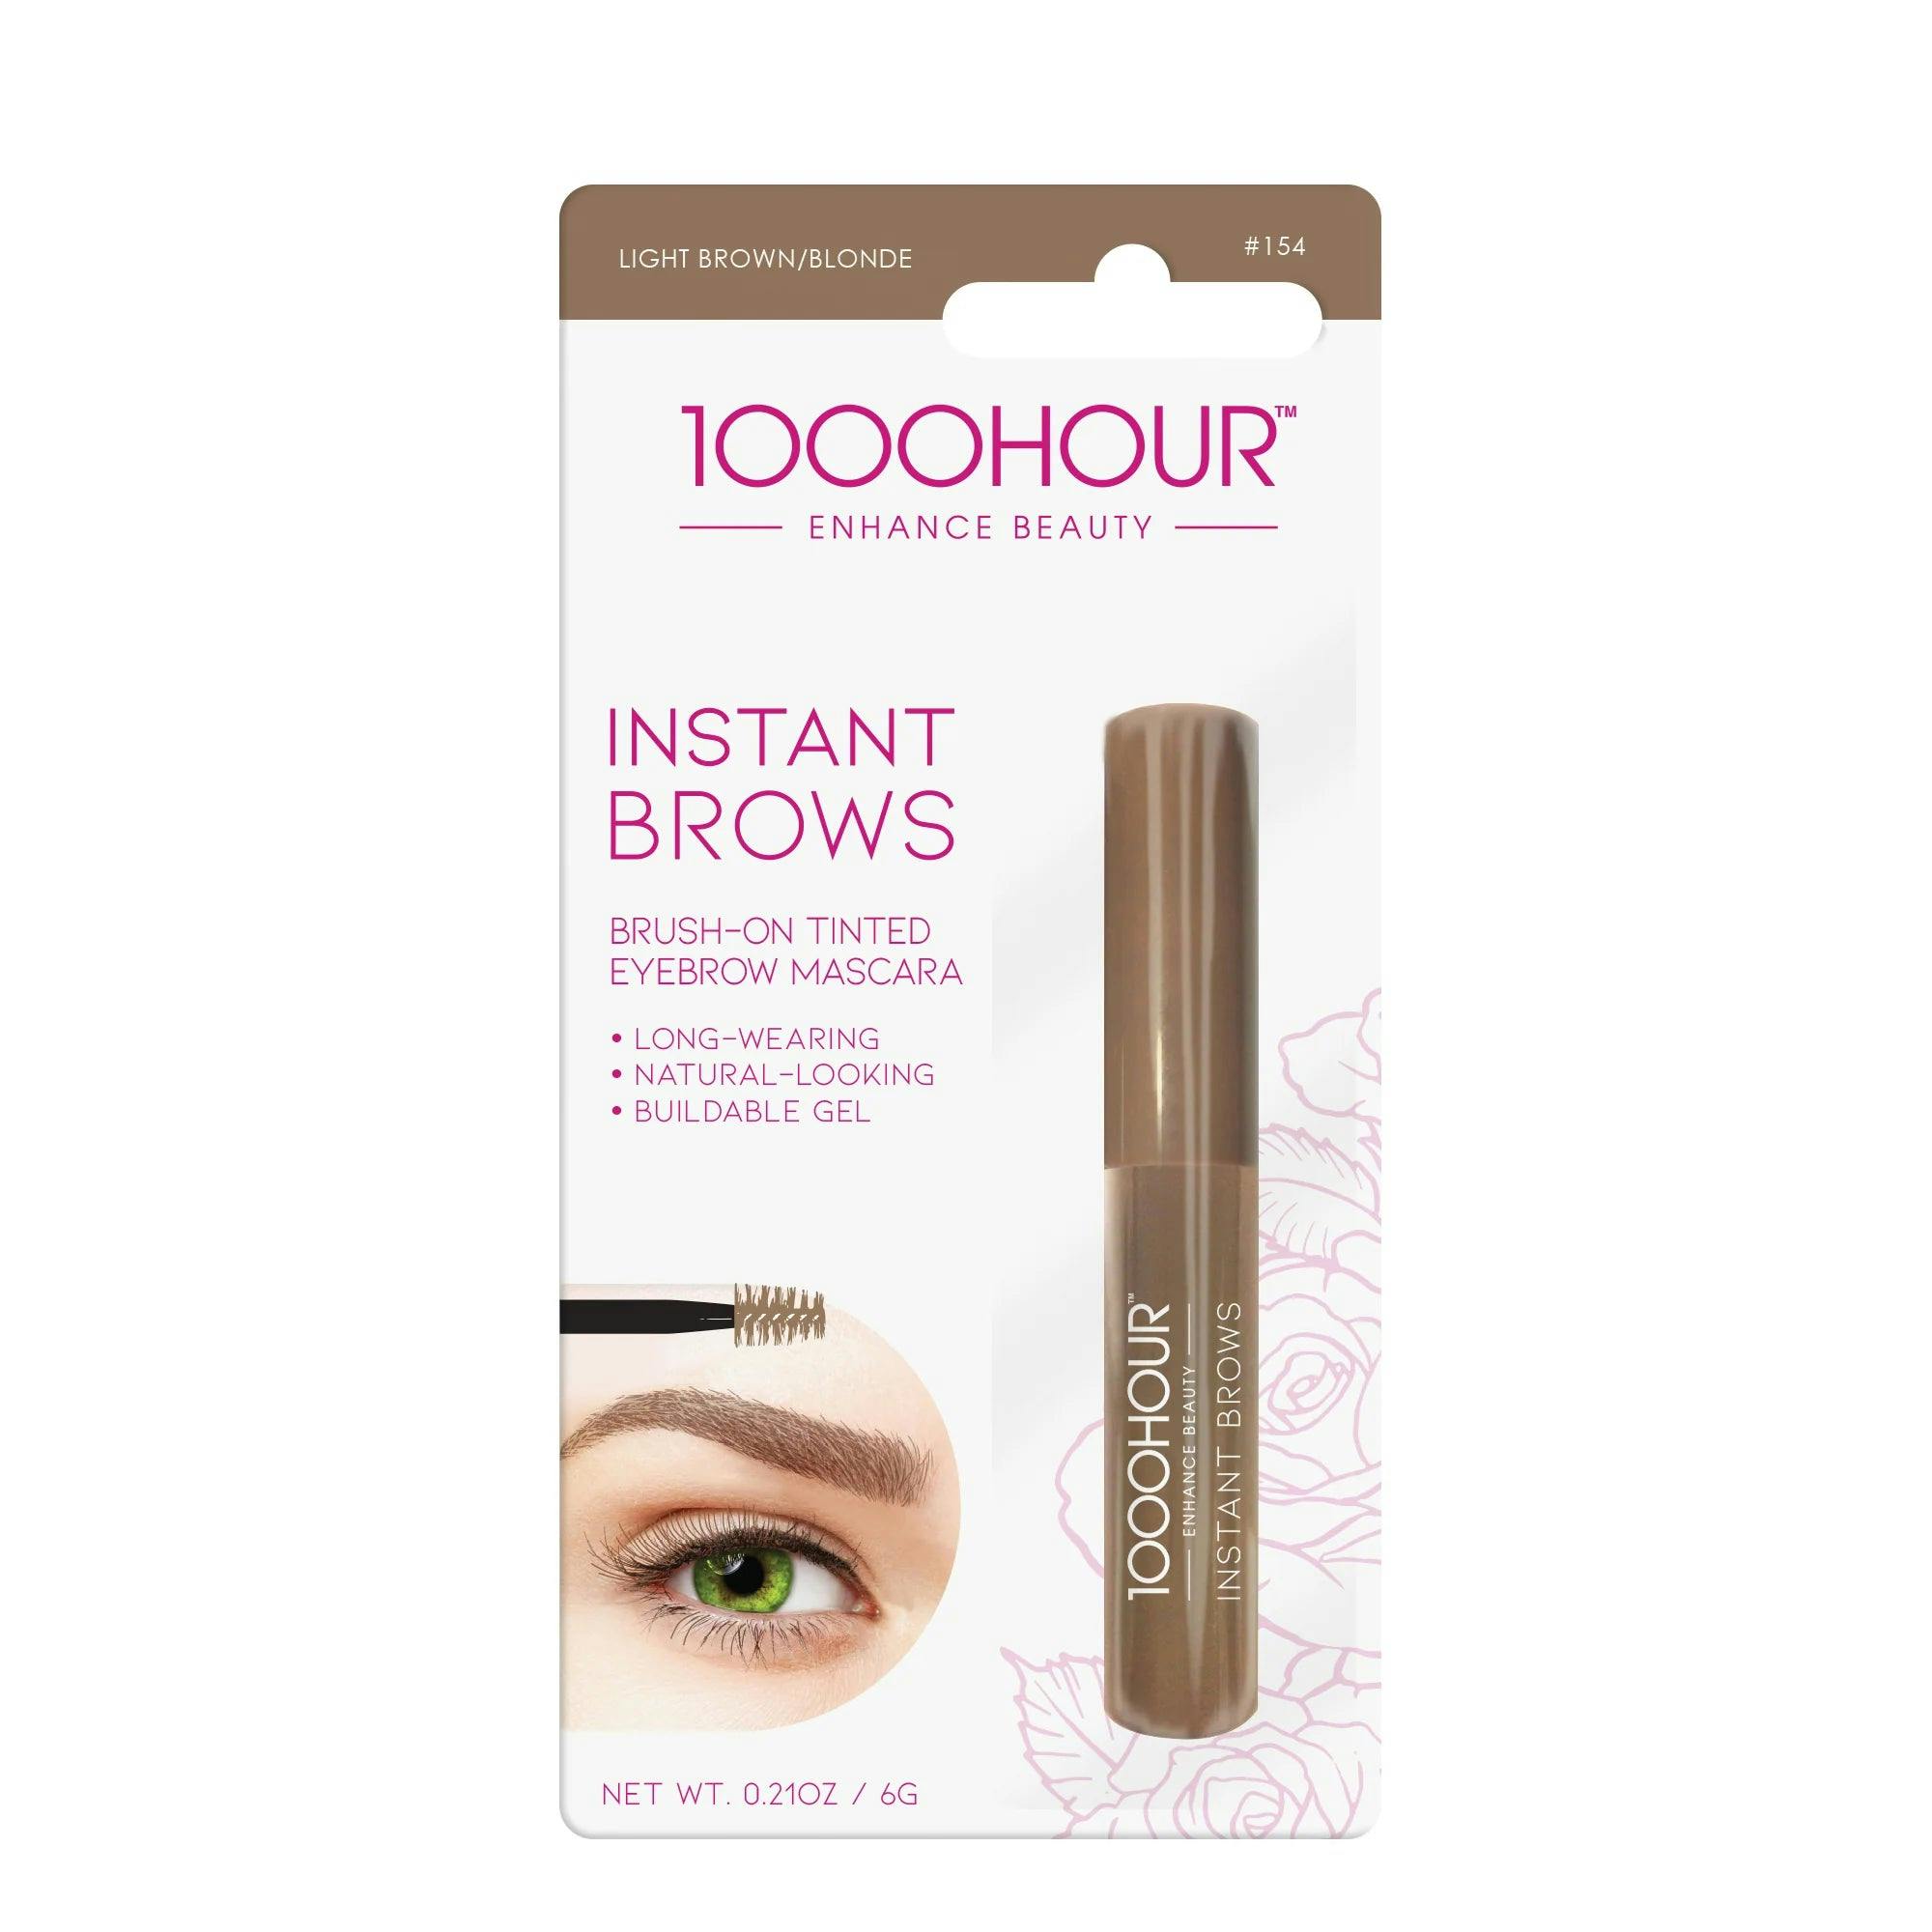 1000 Hour Instant Brows Mascara - Light Brown/Blonde